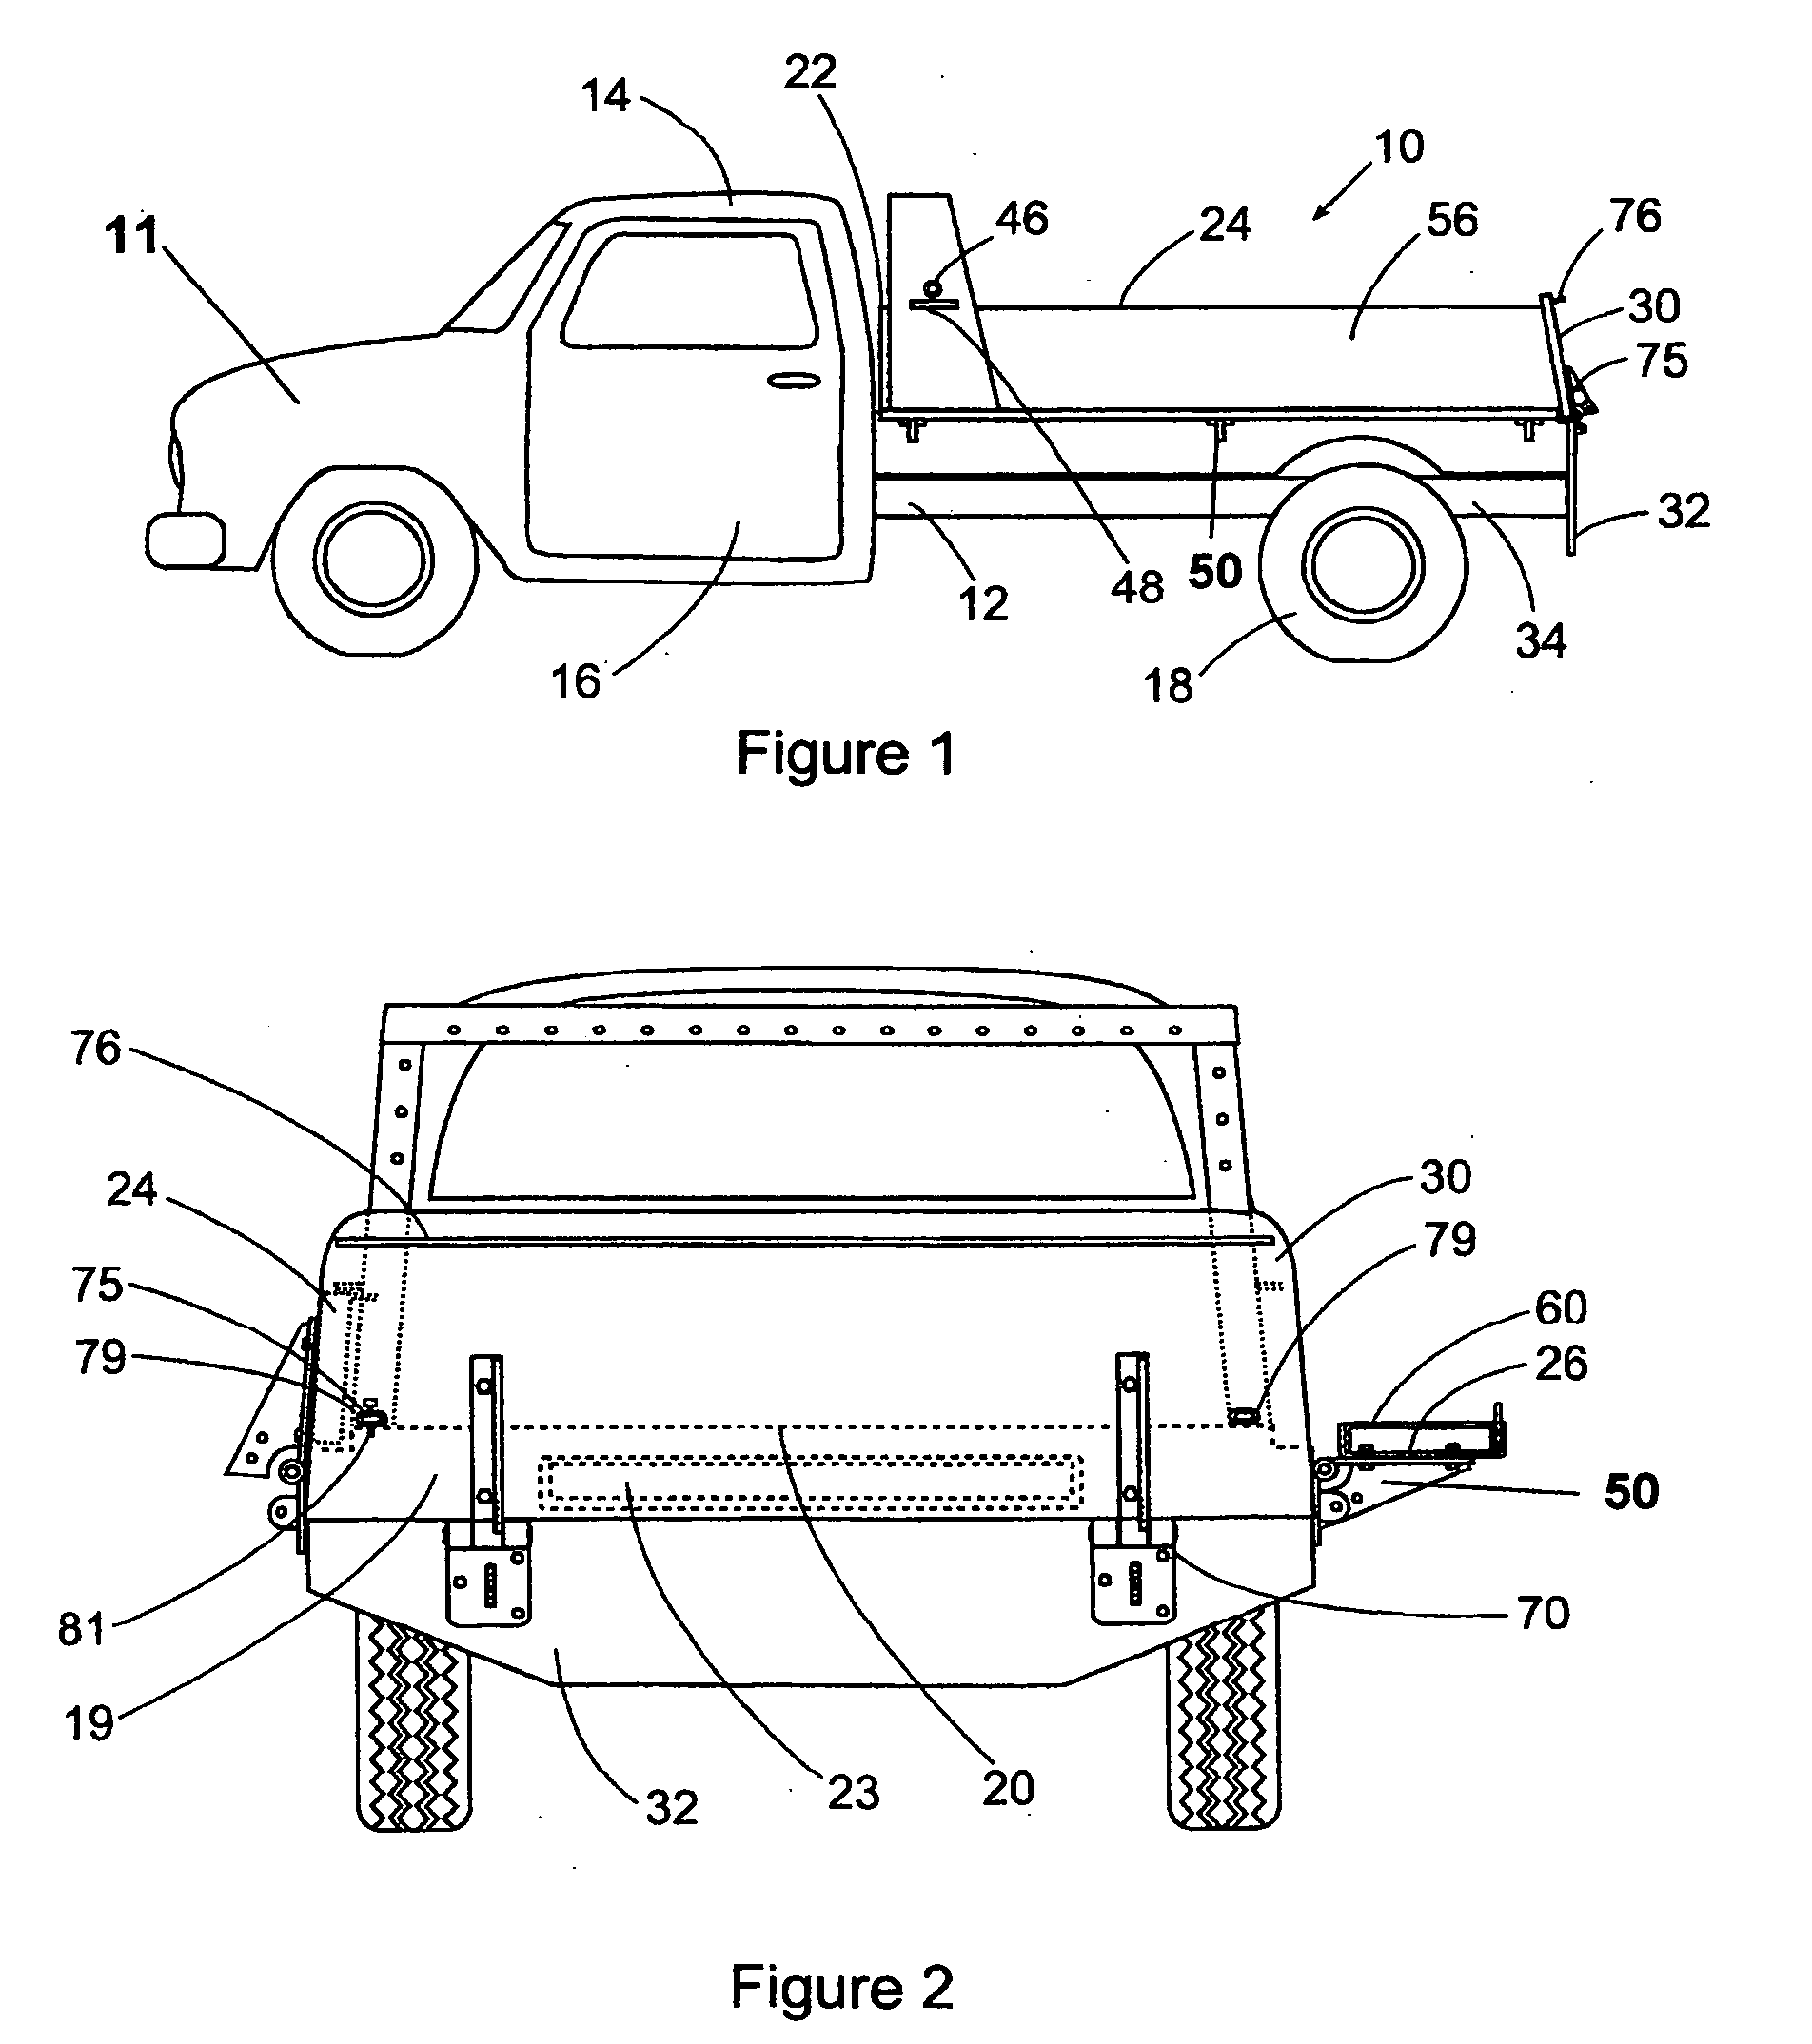 Folding sidewall assembly for truck beds